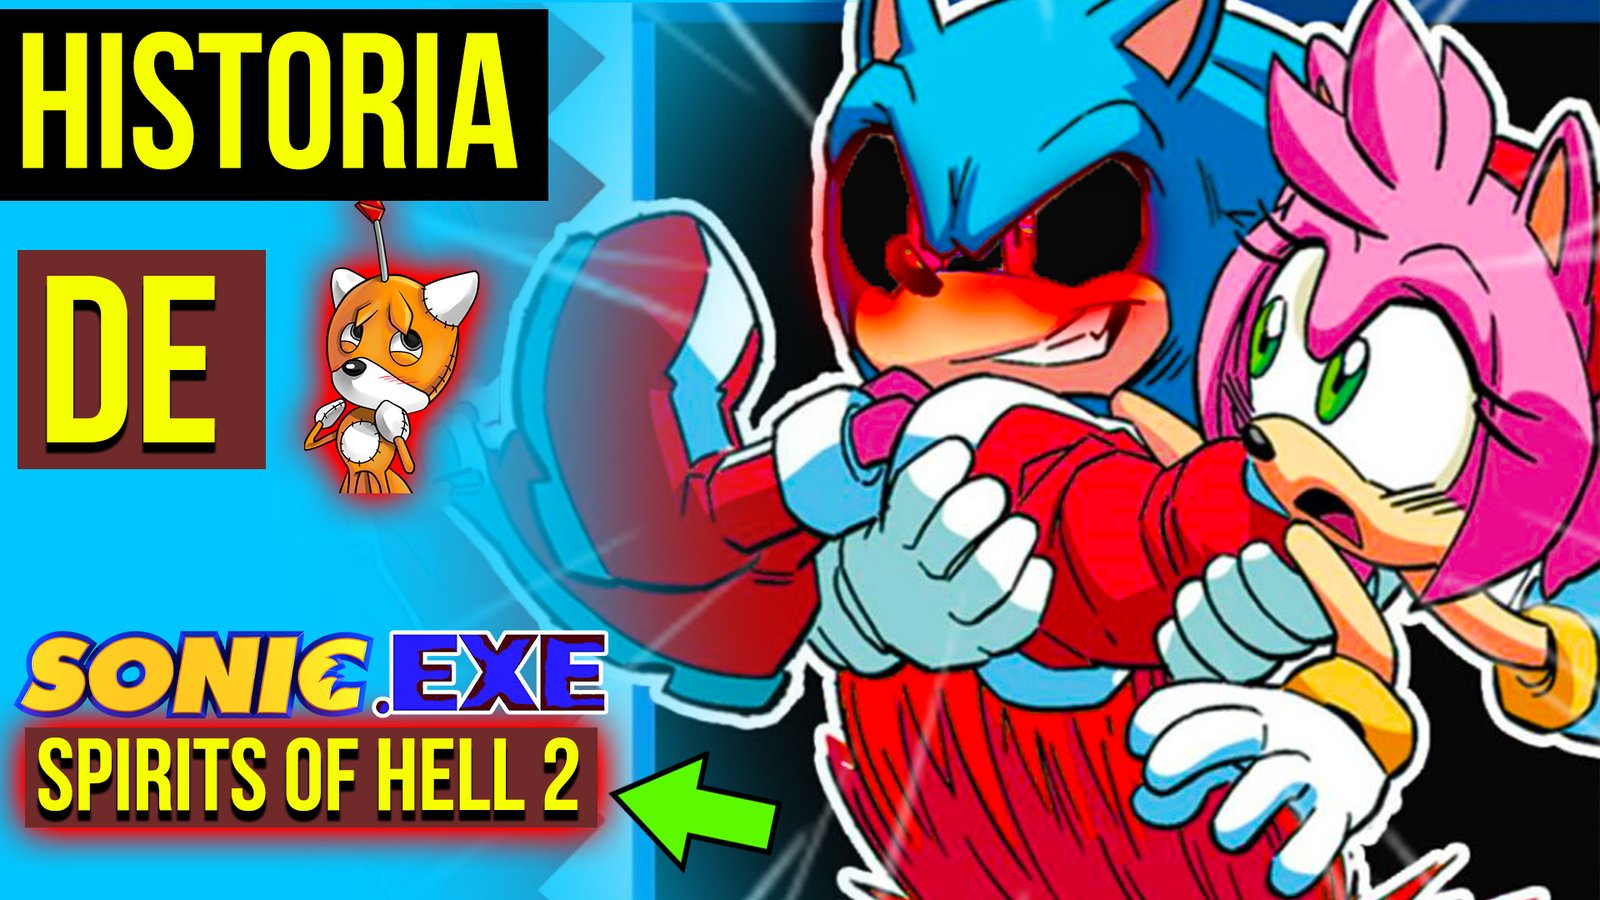 Sonic exe Spirits of hell 2